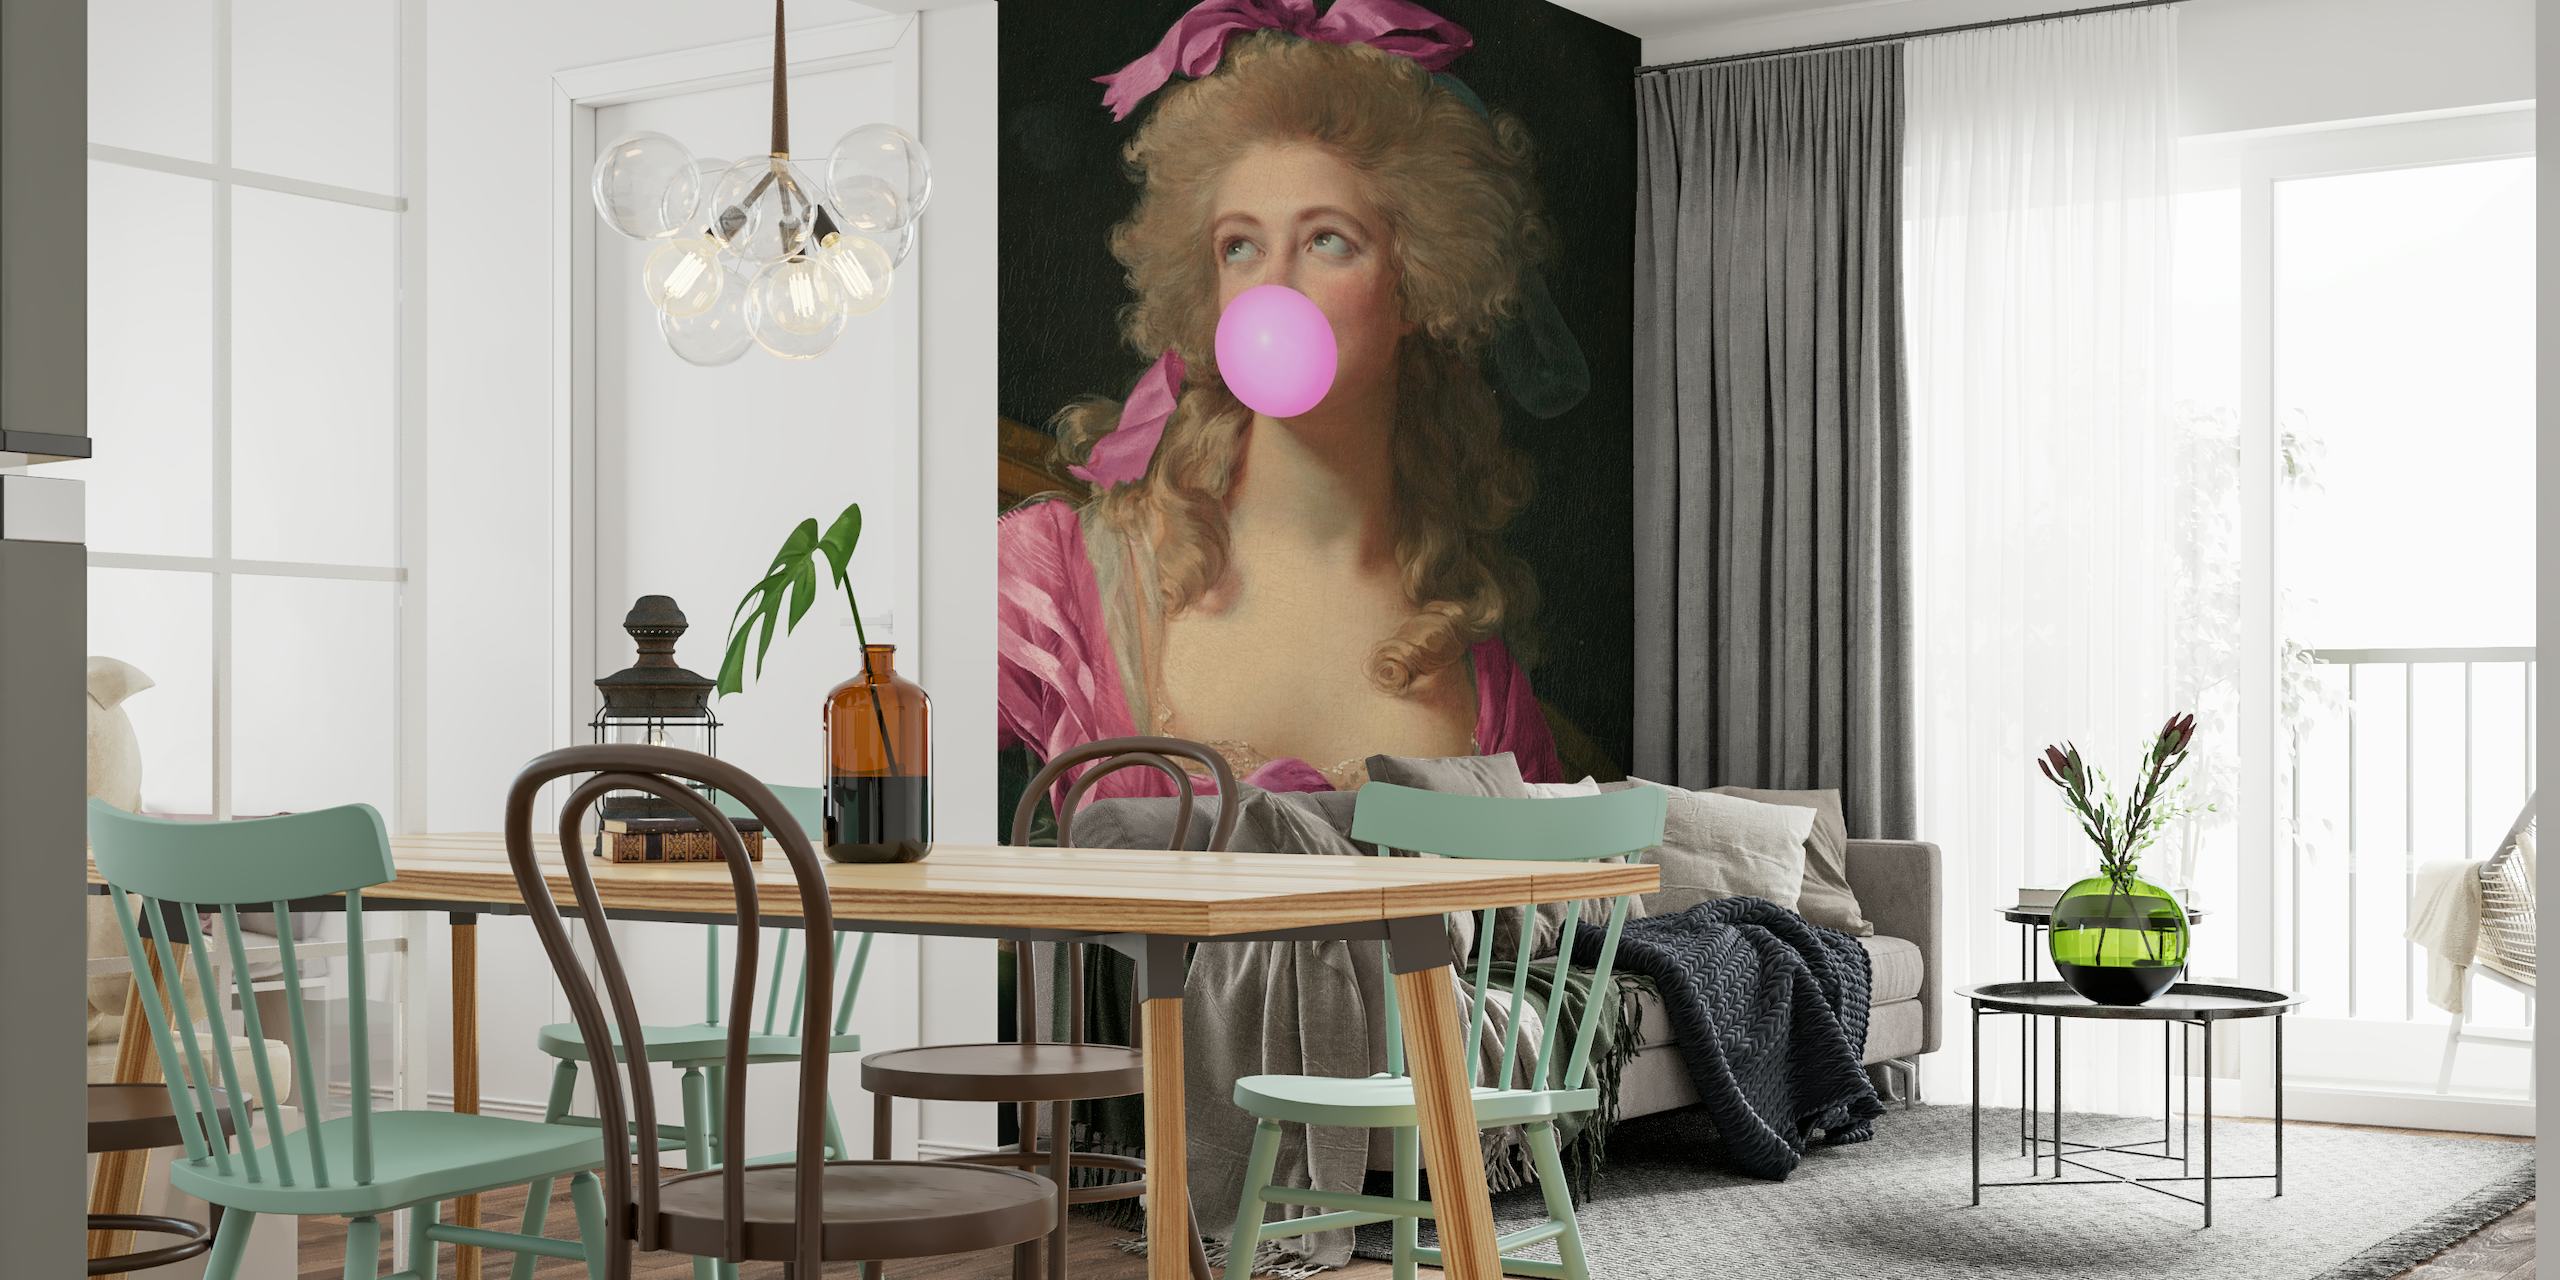 Madame Bubble-Gum Dark Pink wall mural featuring a Baroque-style portrait of a lady blowing a bubblegum bubble